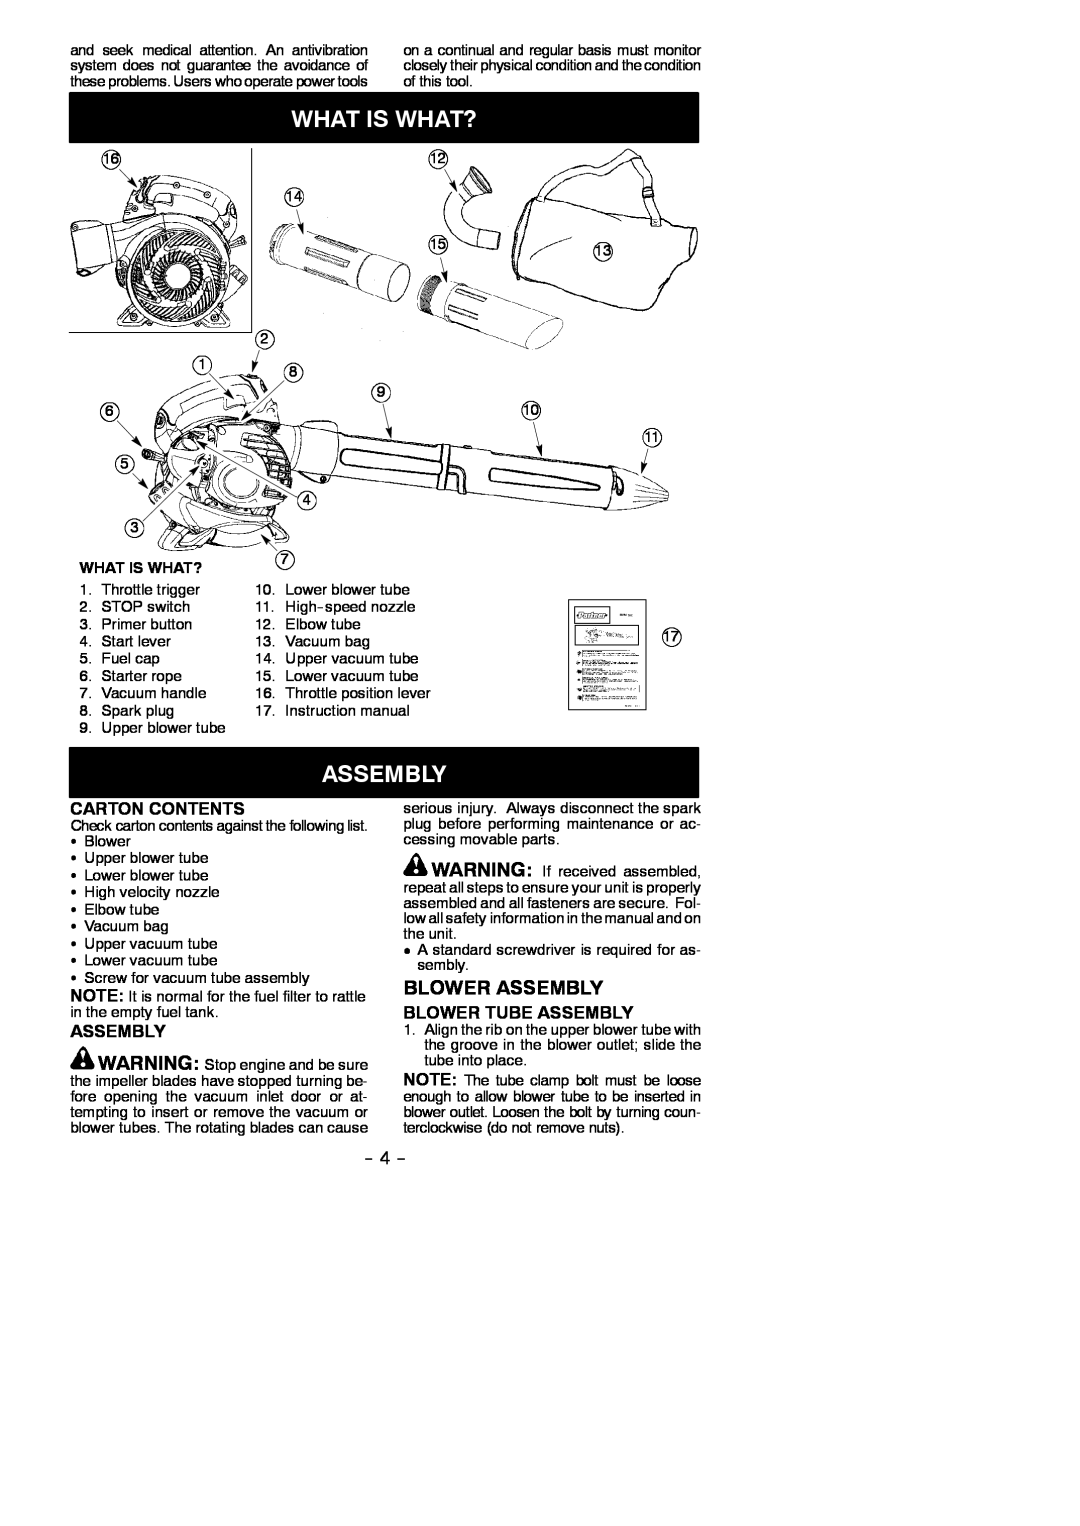 Partner Tech GBV 345 instruction manual What Is What?, Blower Assembly, Carton Contents, Blower Tube Assembly 